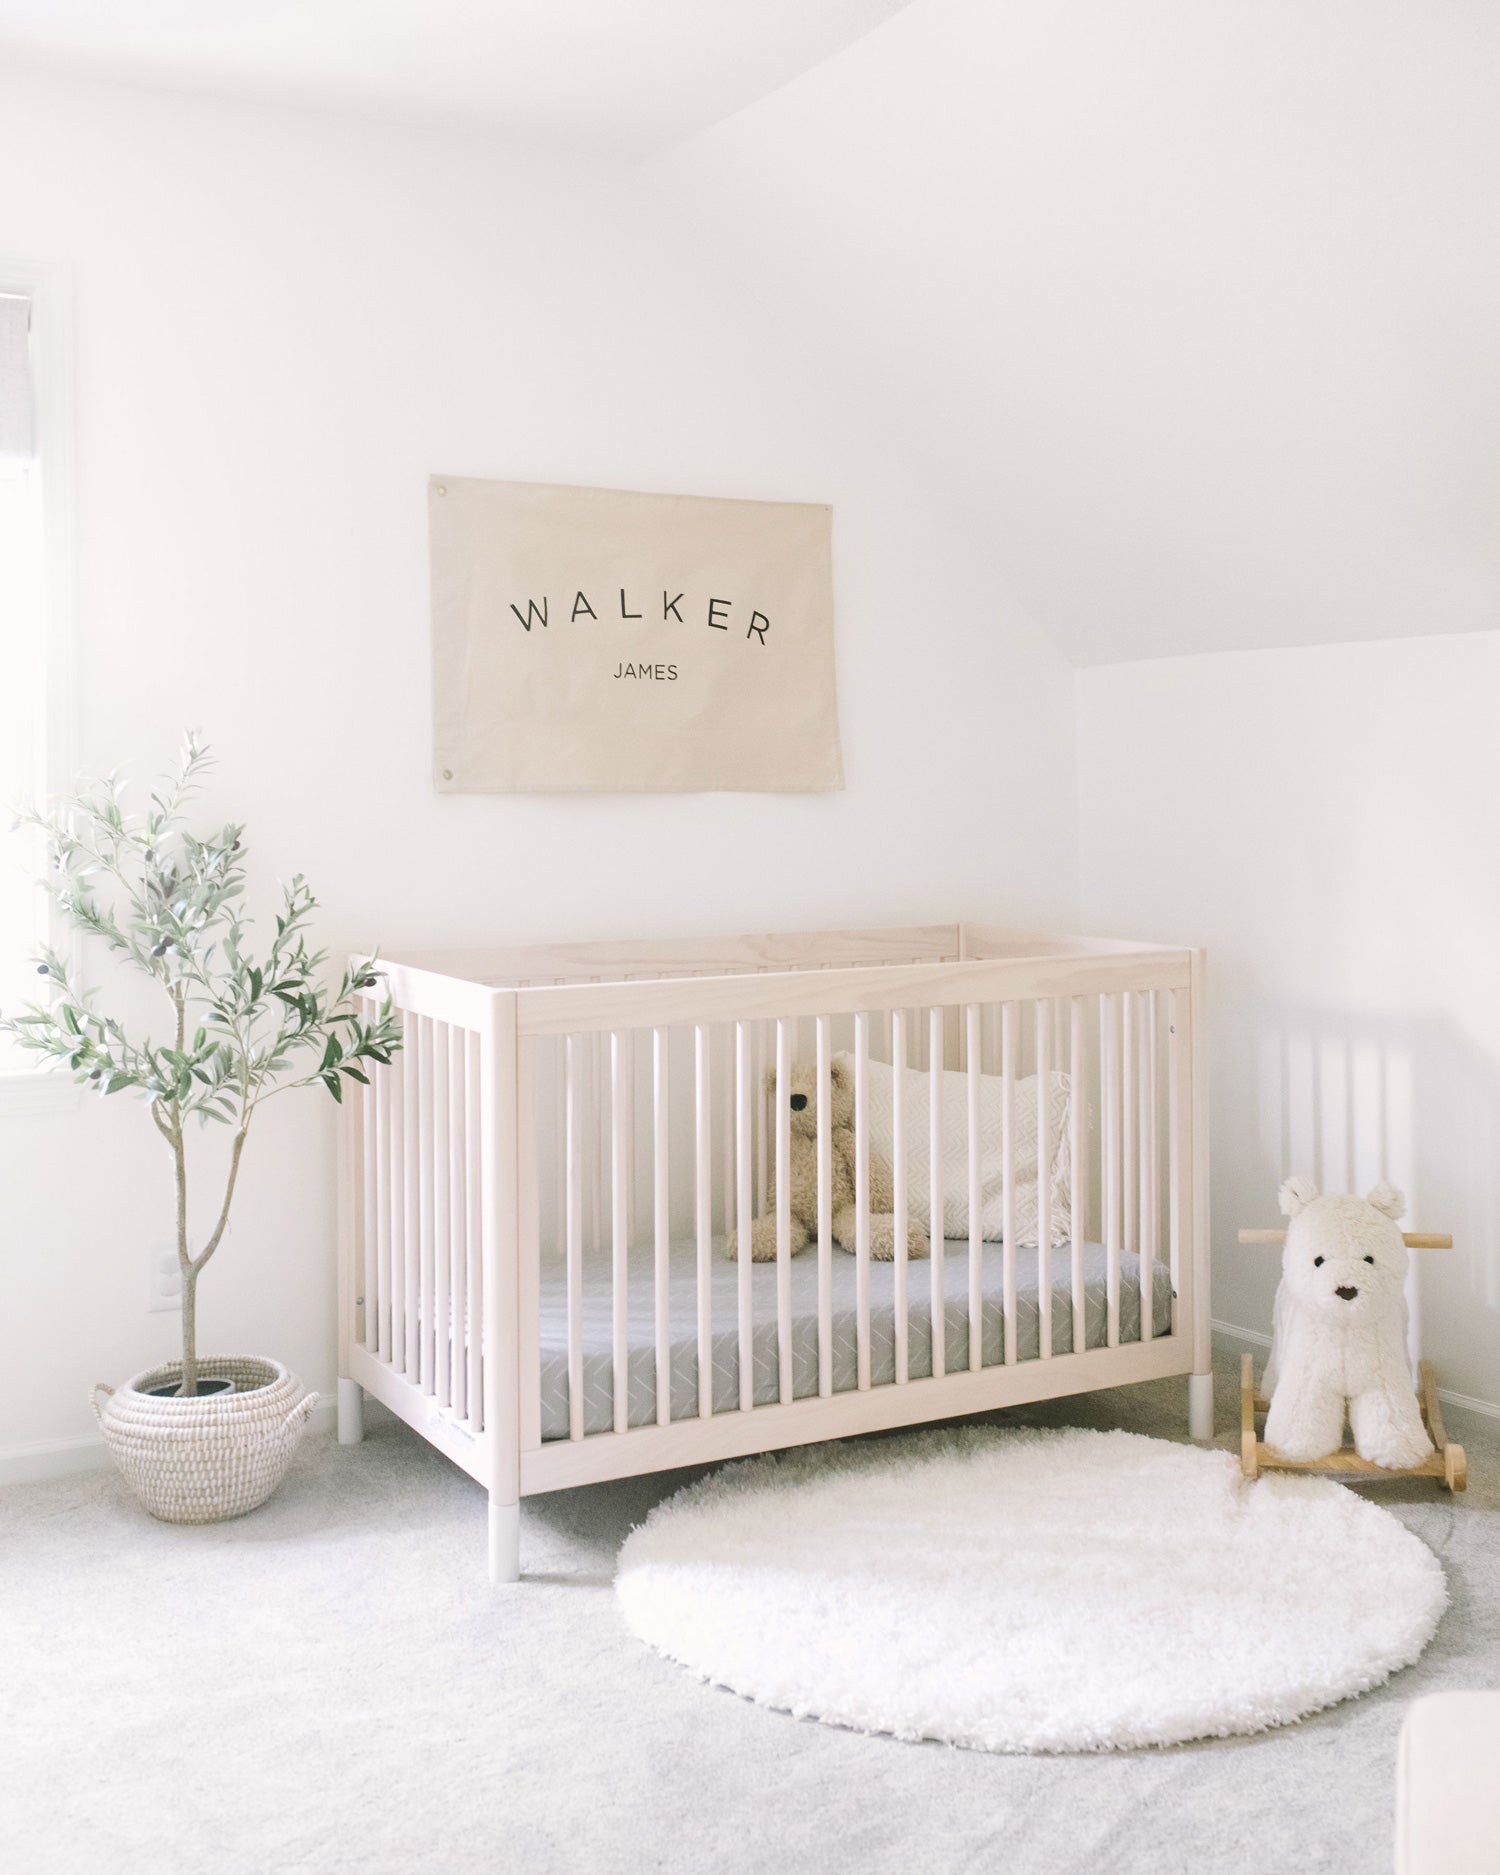 Minimal boho nursery interior design for baby boy with white and green color palette